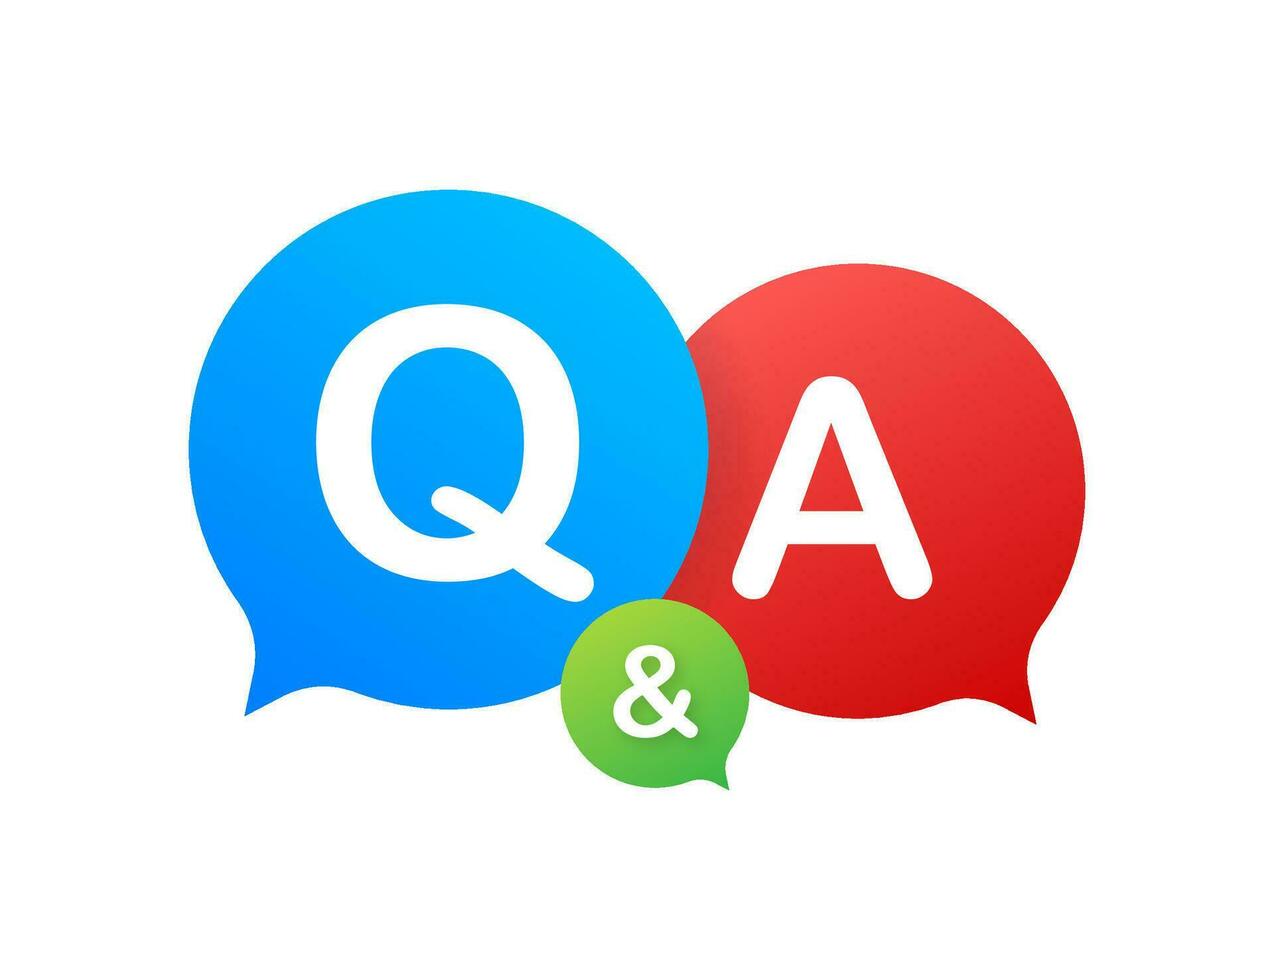 Question and Answer Bubble Chat on white background. Vector stock illustration